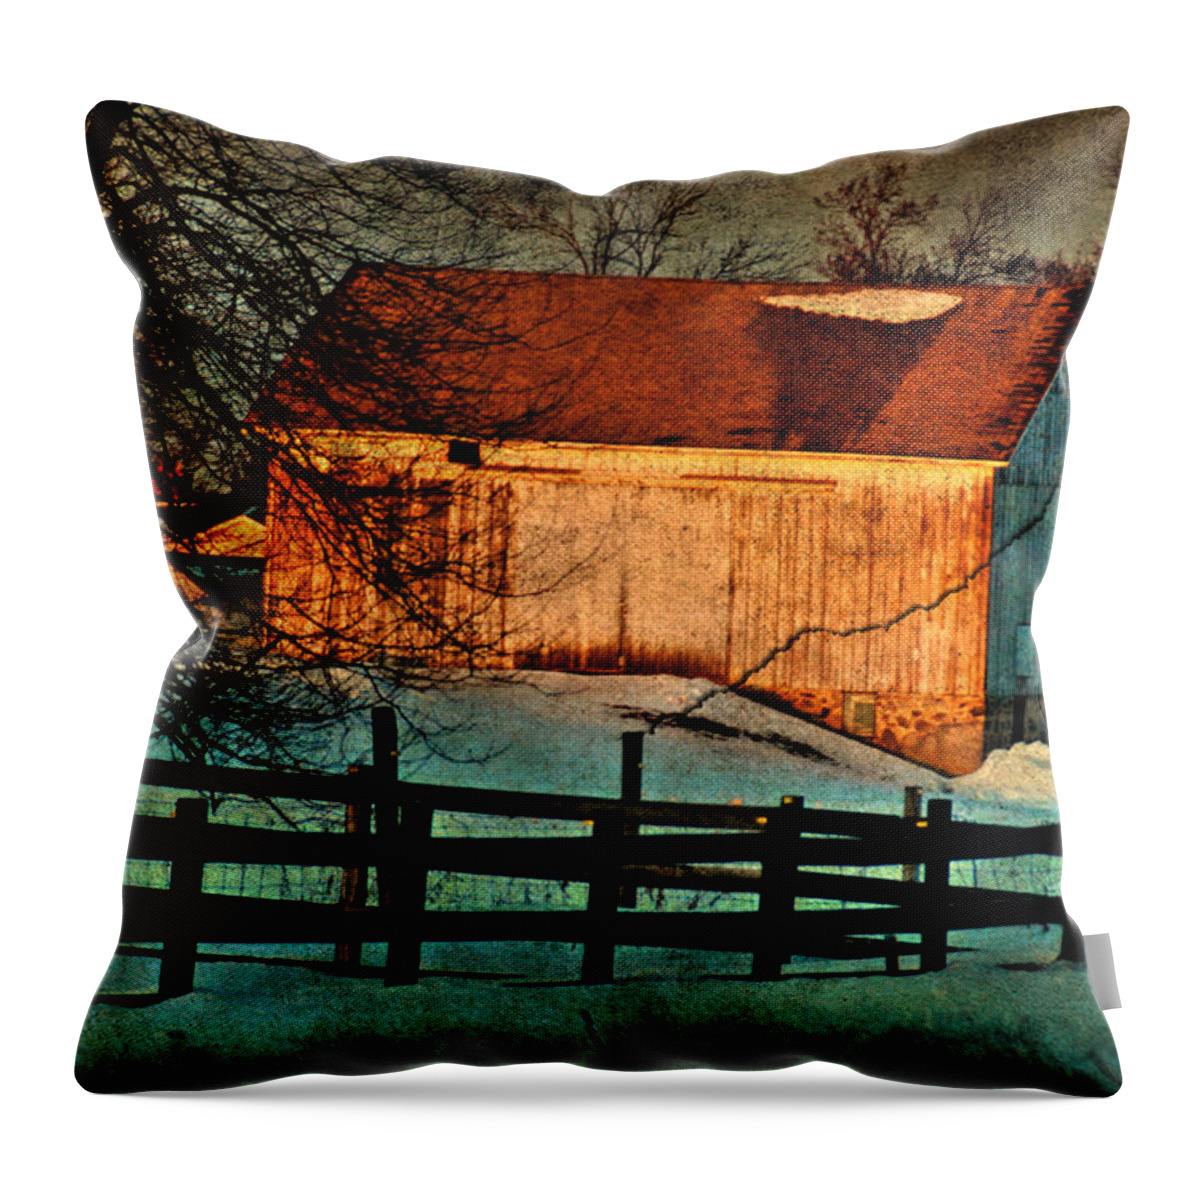 Jma Throw Pillow featuring the photograph Sunset Reflects - Aged Photo by Janice Adomeit